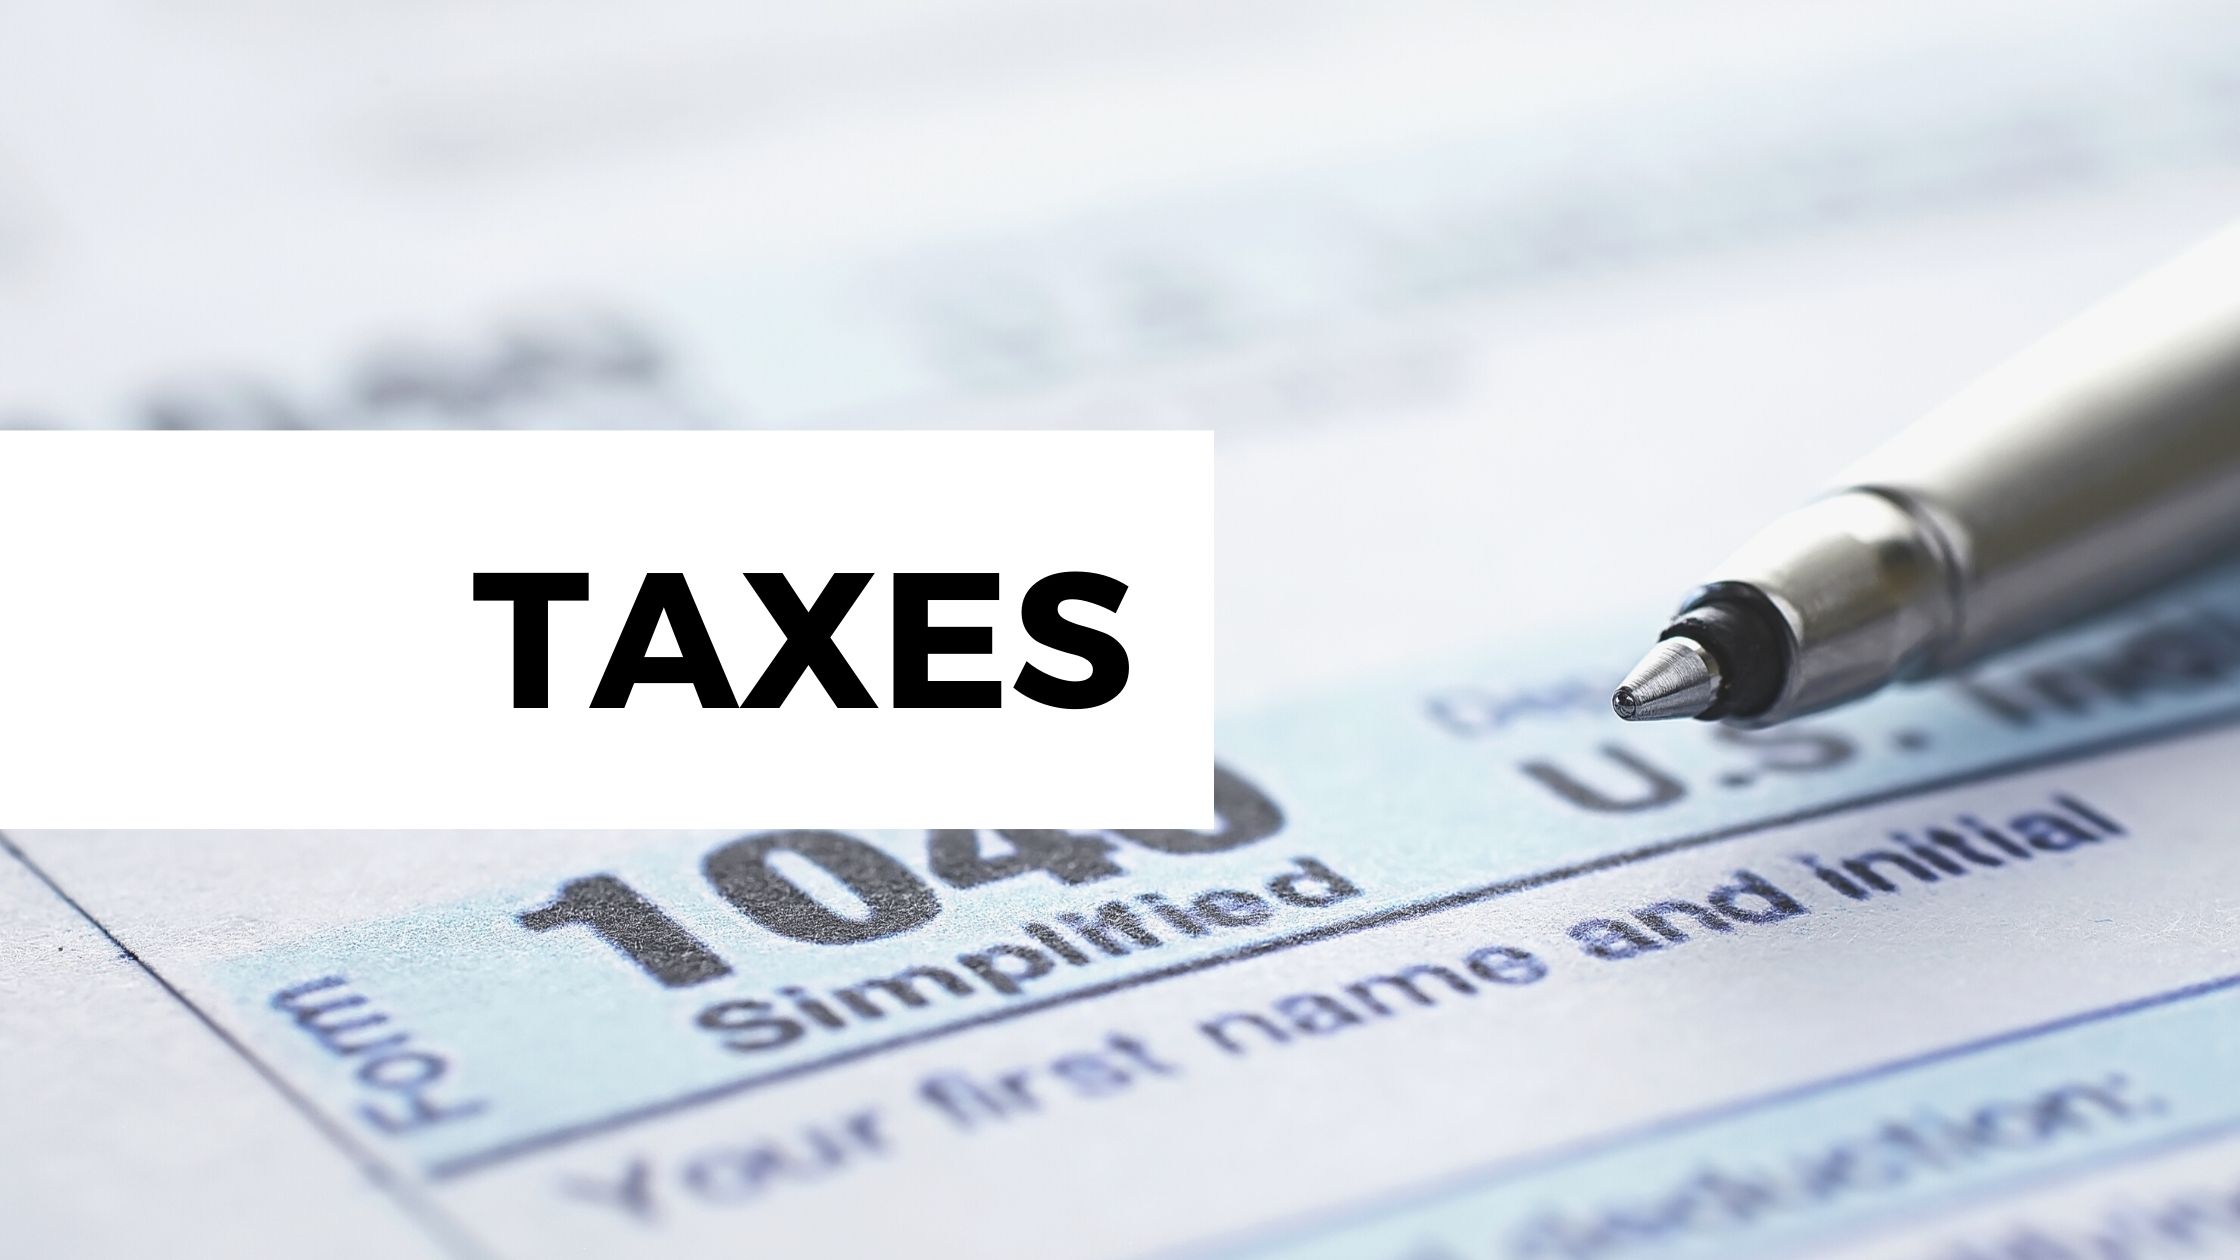 SLATS, SPATS, GRATS, ILITS, NINGS, IDGTS: How Possible Tax Changes May Affect Current and Future Estate Planning, Webinar